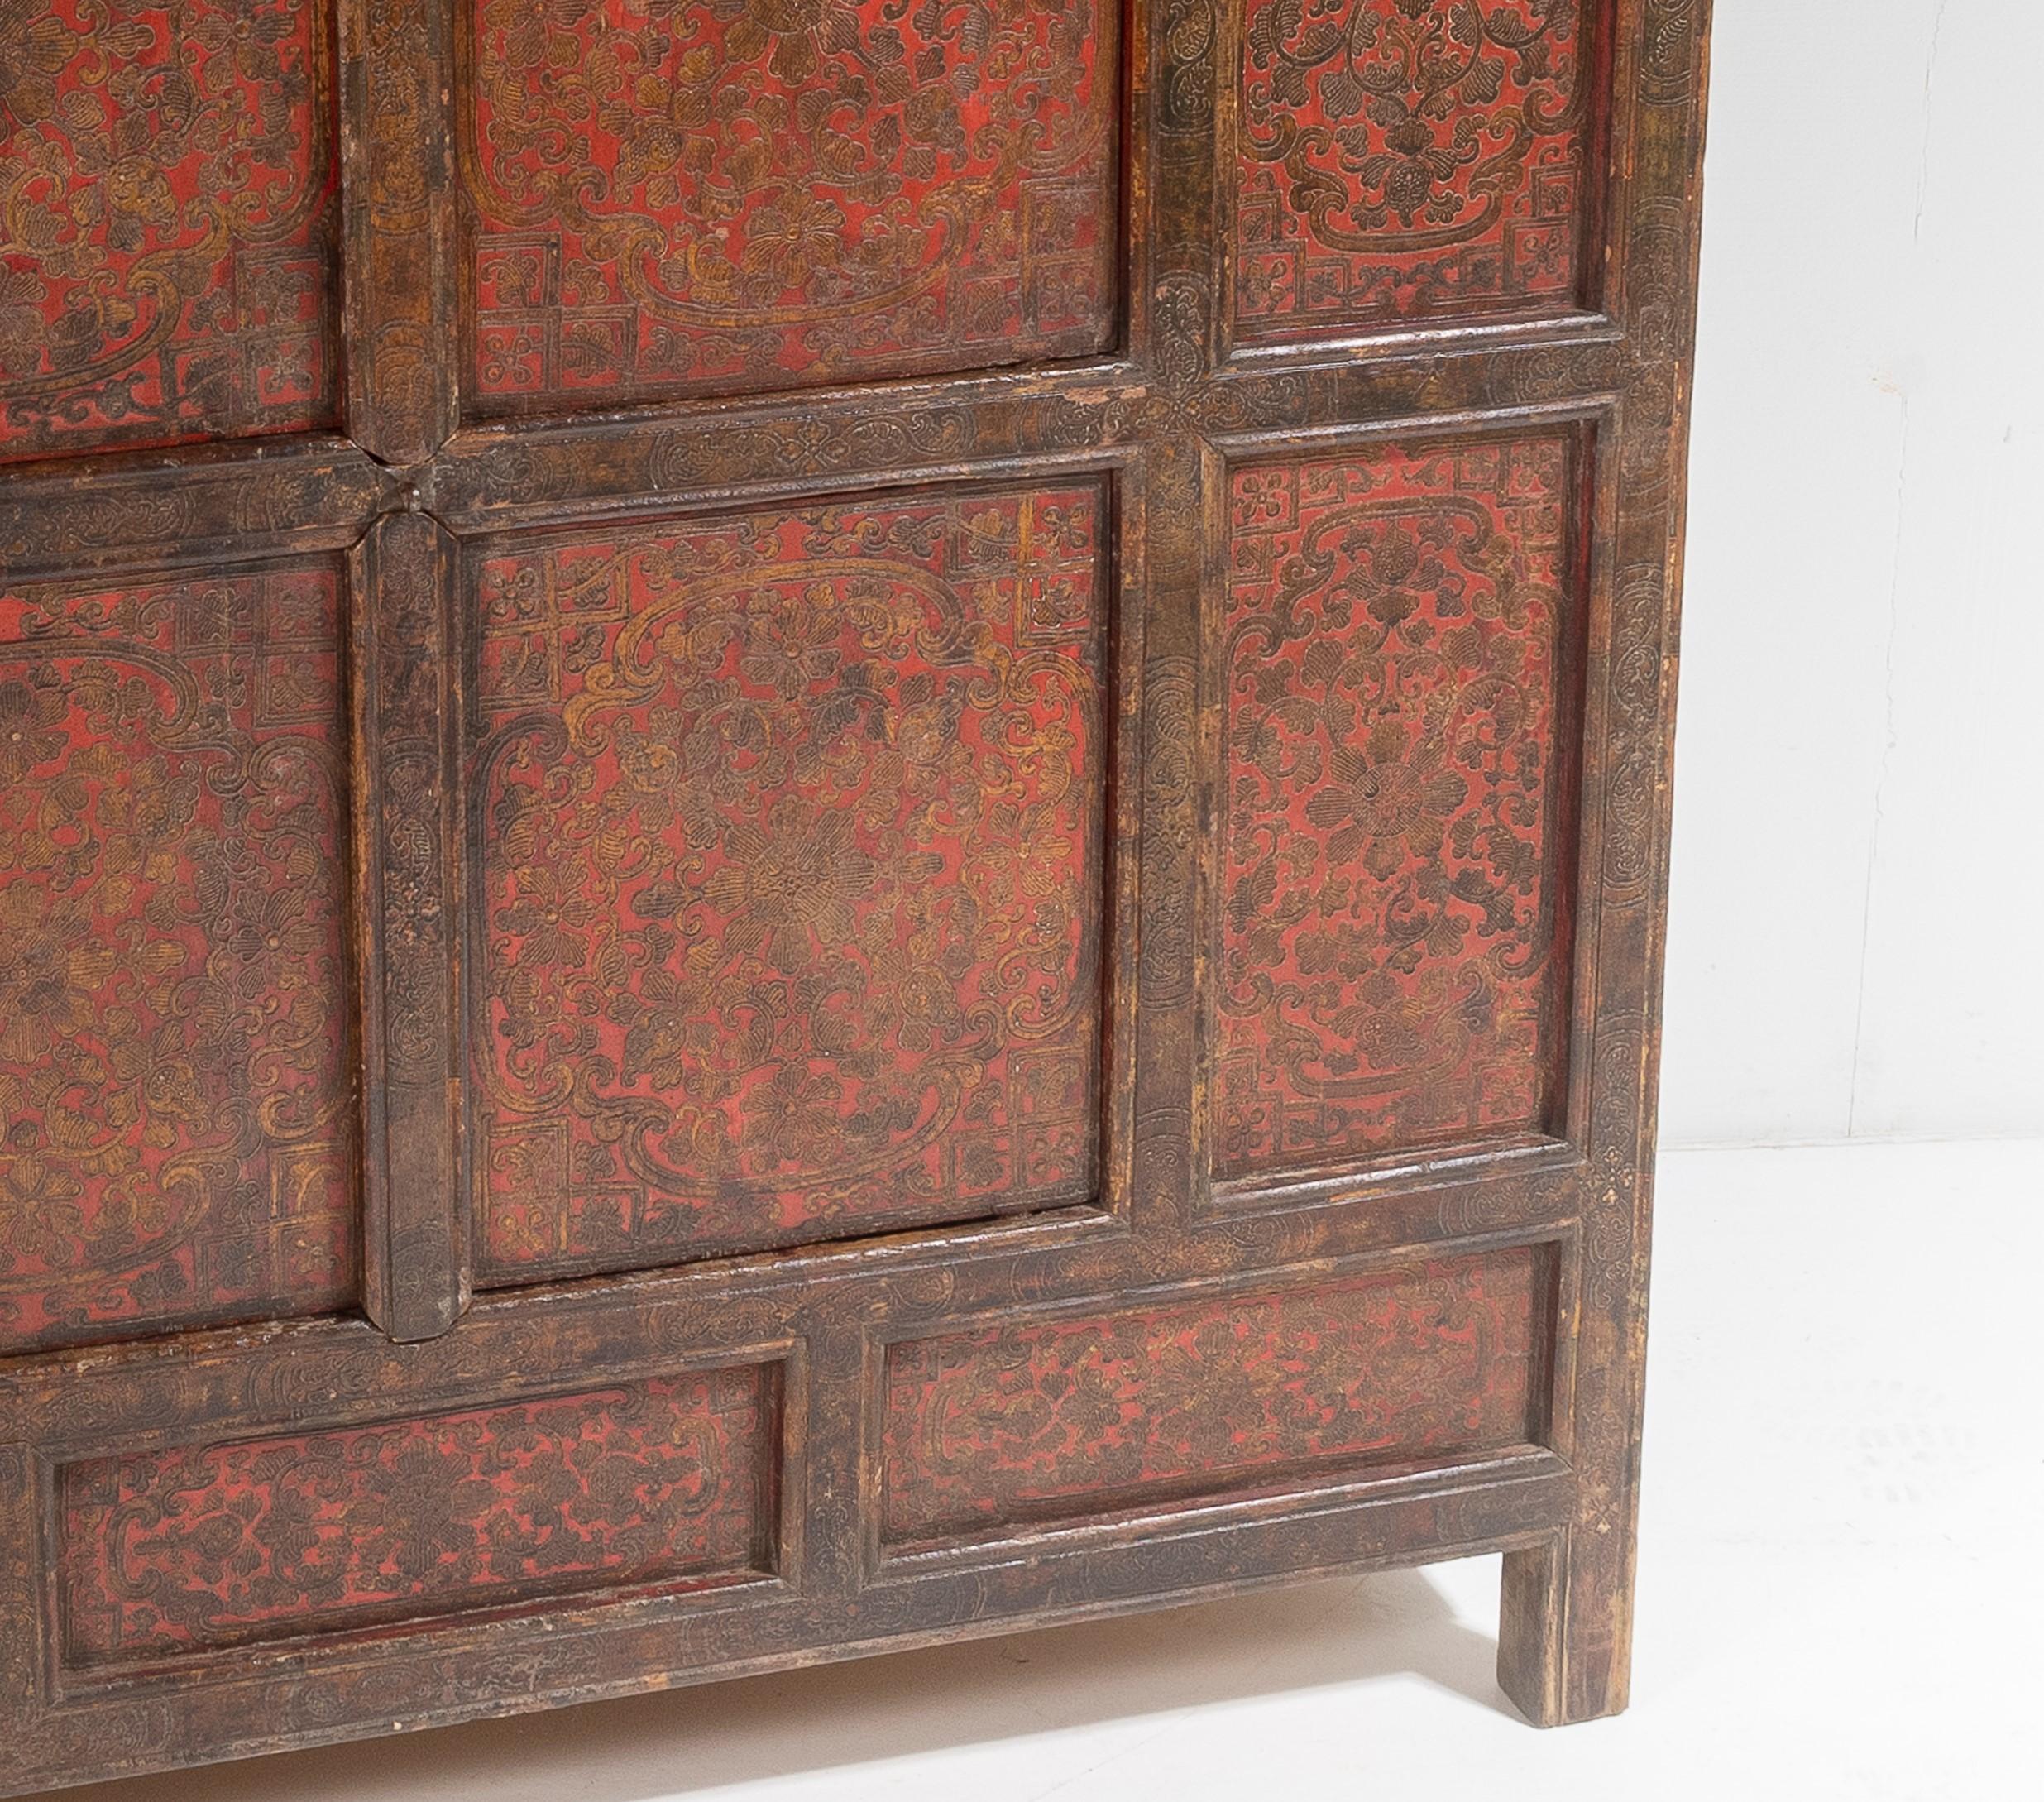 Original 19thC Large Chinese Tibetan Hand Painted Lacquered Cupboard Sideboard For Sale 4